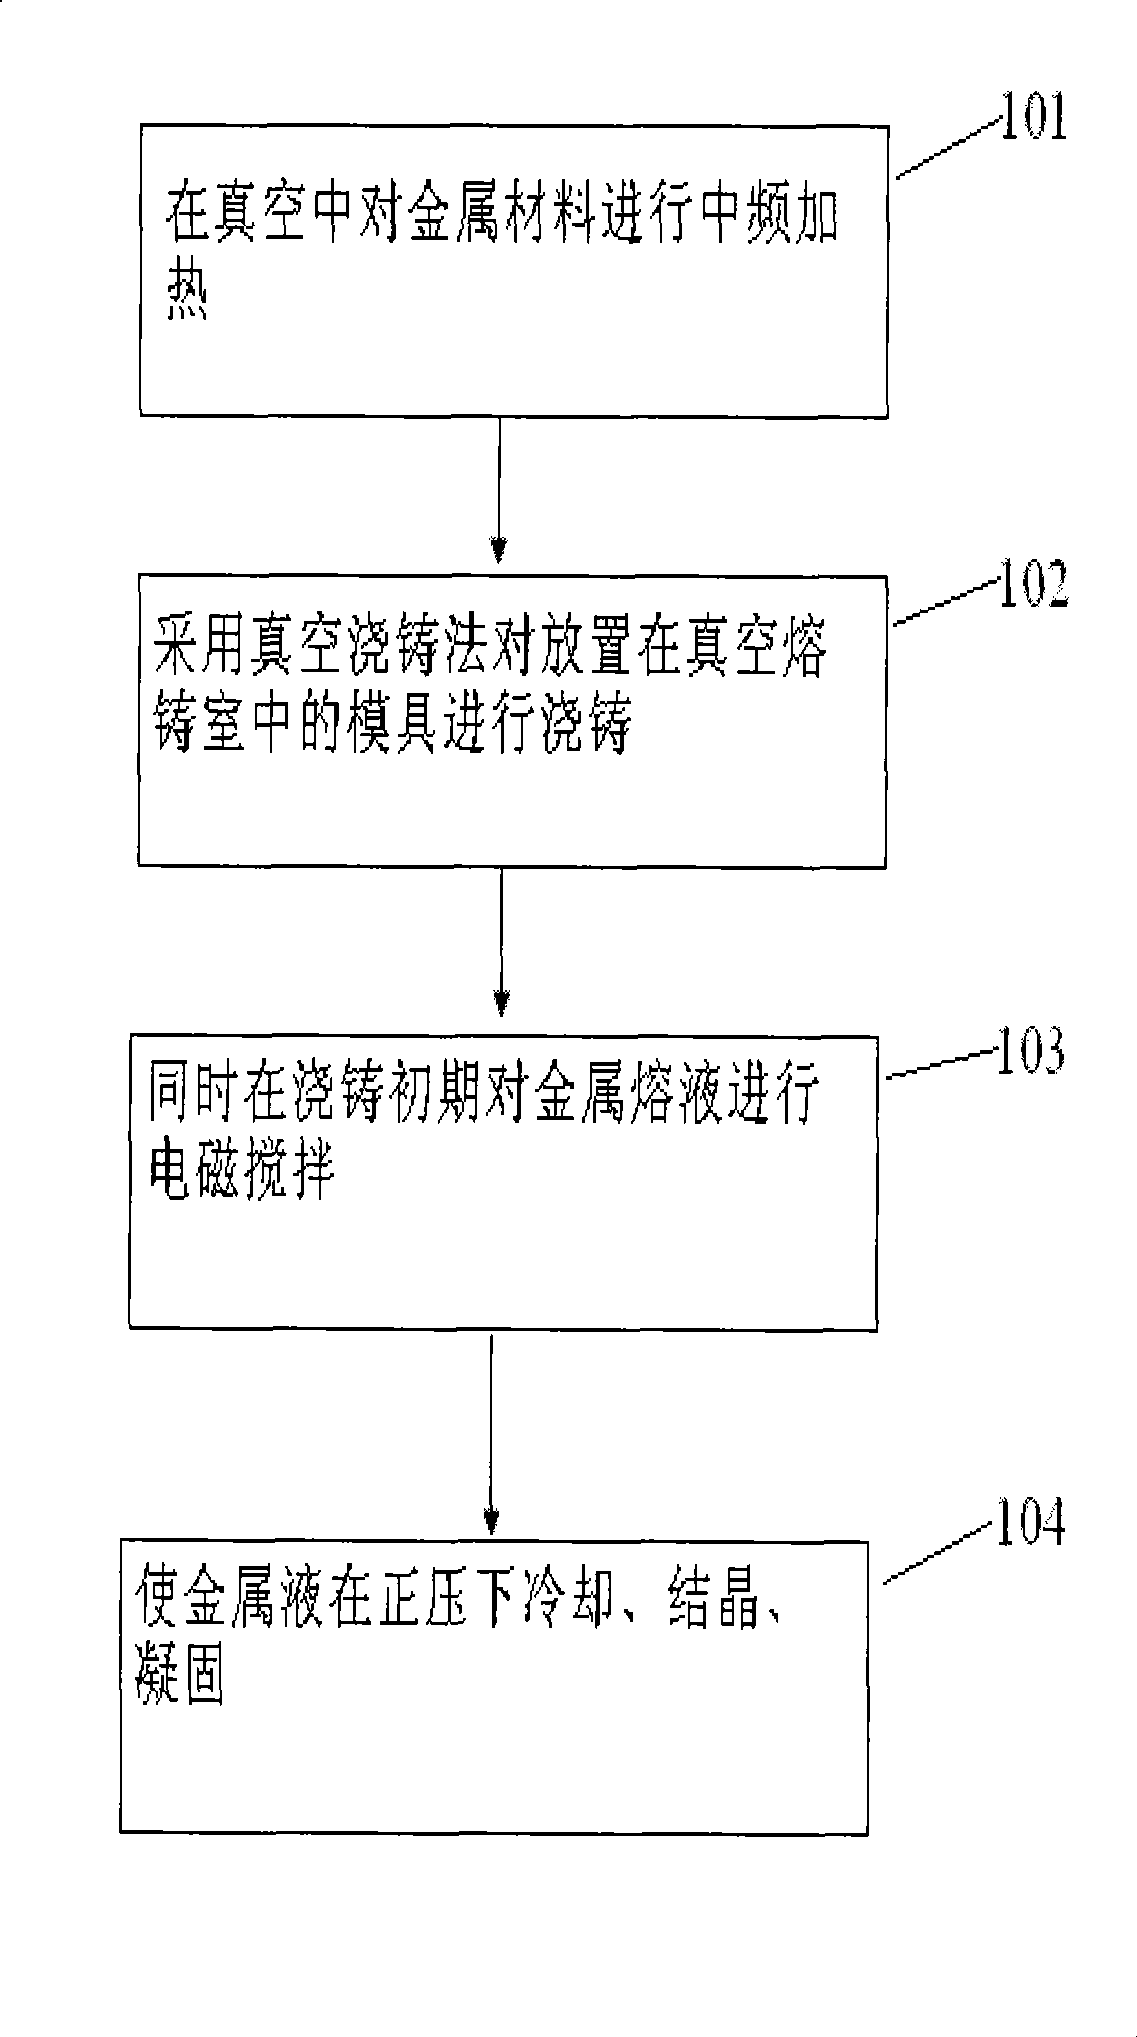 Metal material casting system and method